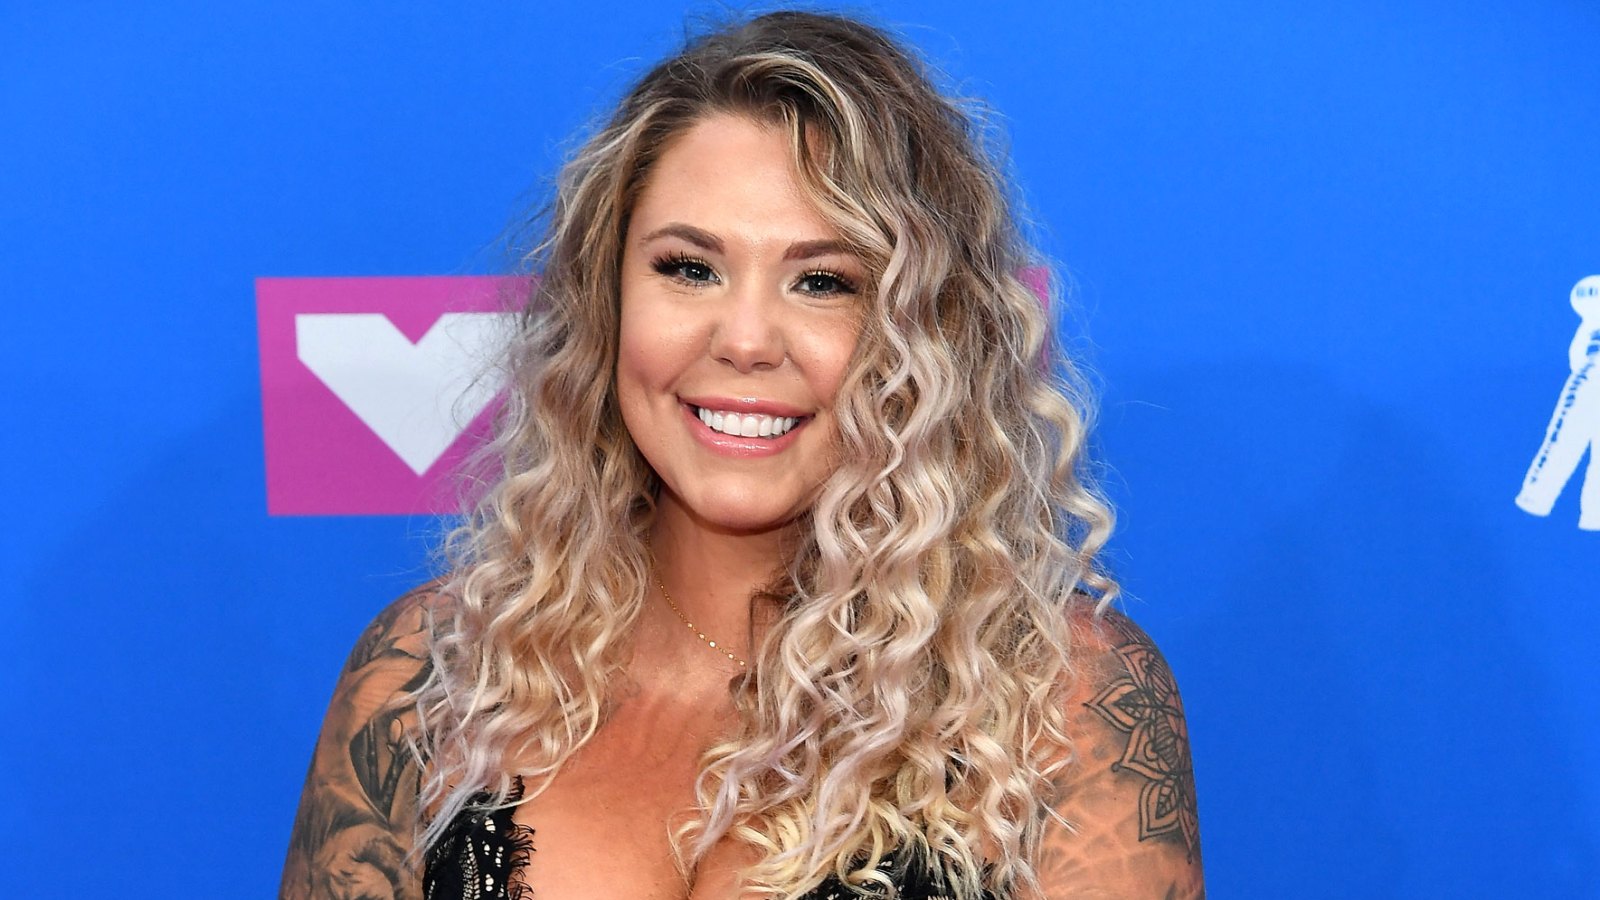 Kailyn Lowry Slammed for Admitting She Didn't Vaccinate Baby Lux